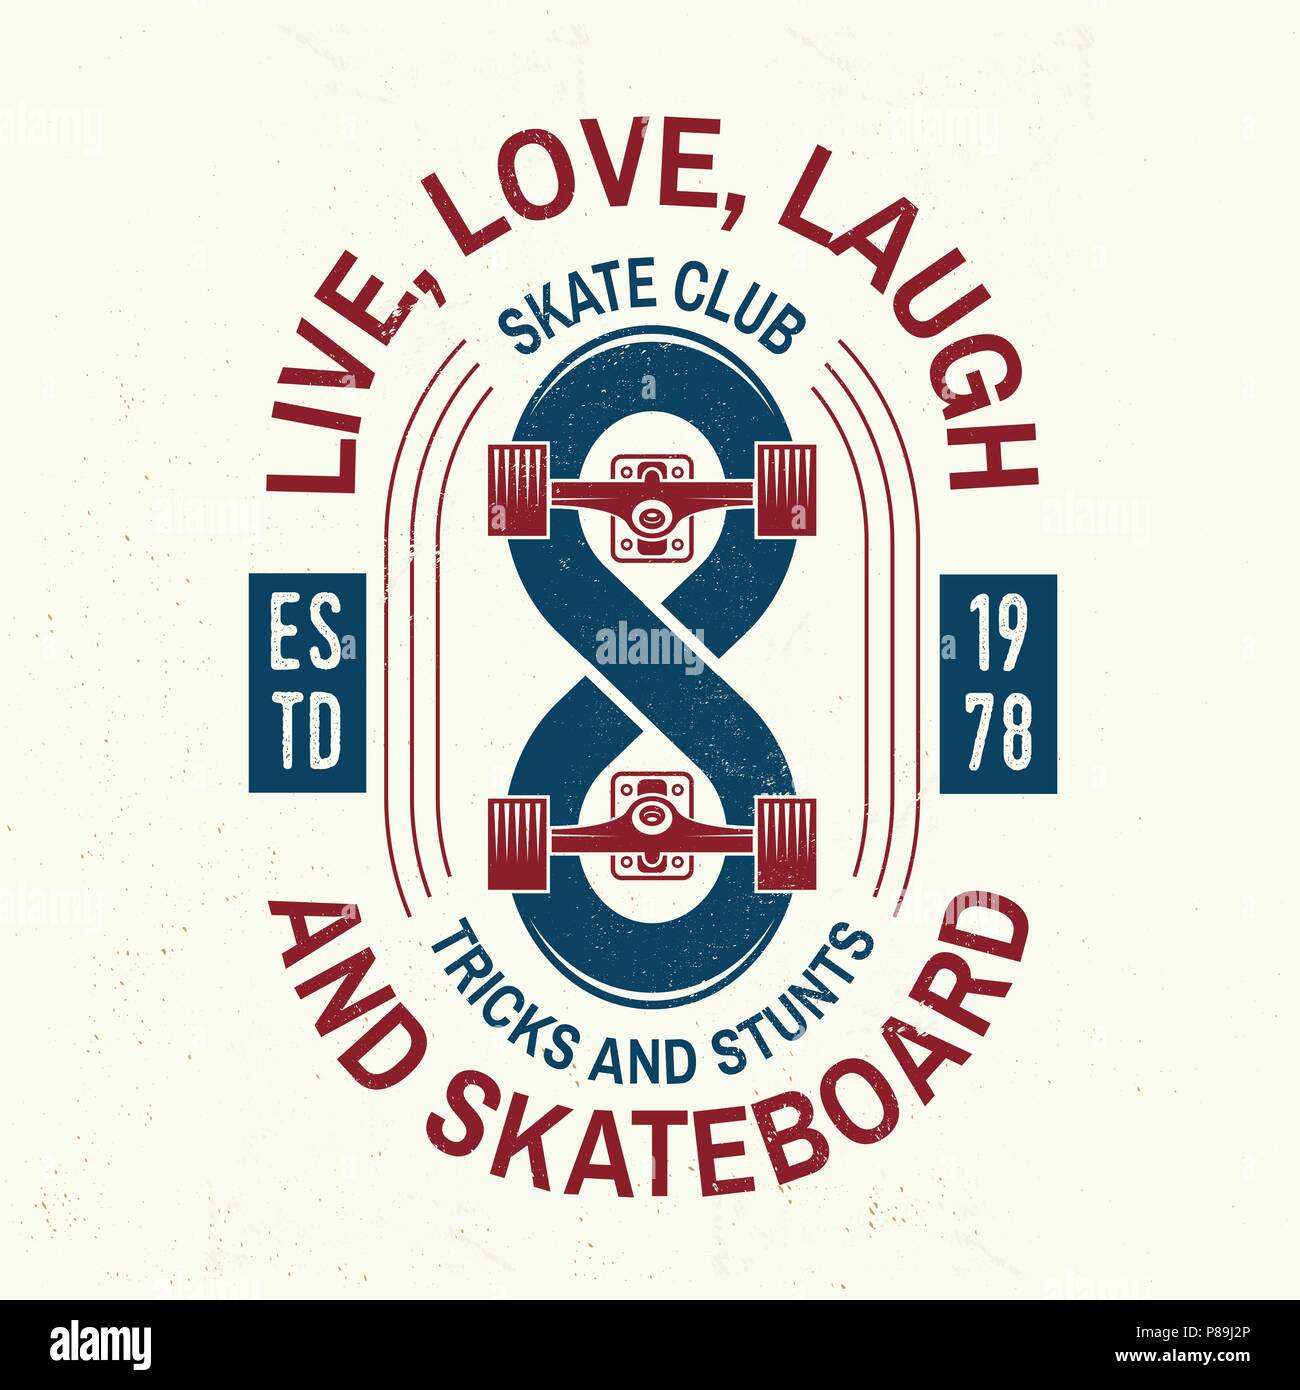 Skateboard club badge. Vector illustration. Extreme sport. For skate club emblems, signs and t-shirt design. Retro typography design with infinity sign and text-Llive, love, laugh and skateboard Stock Vector